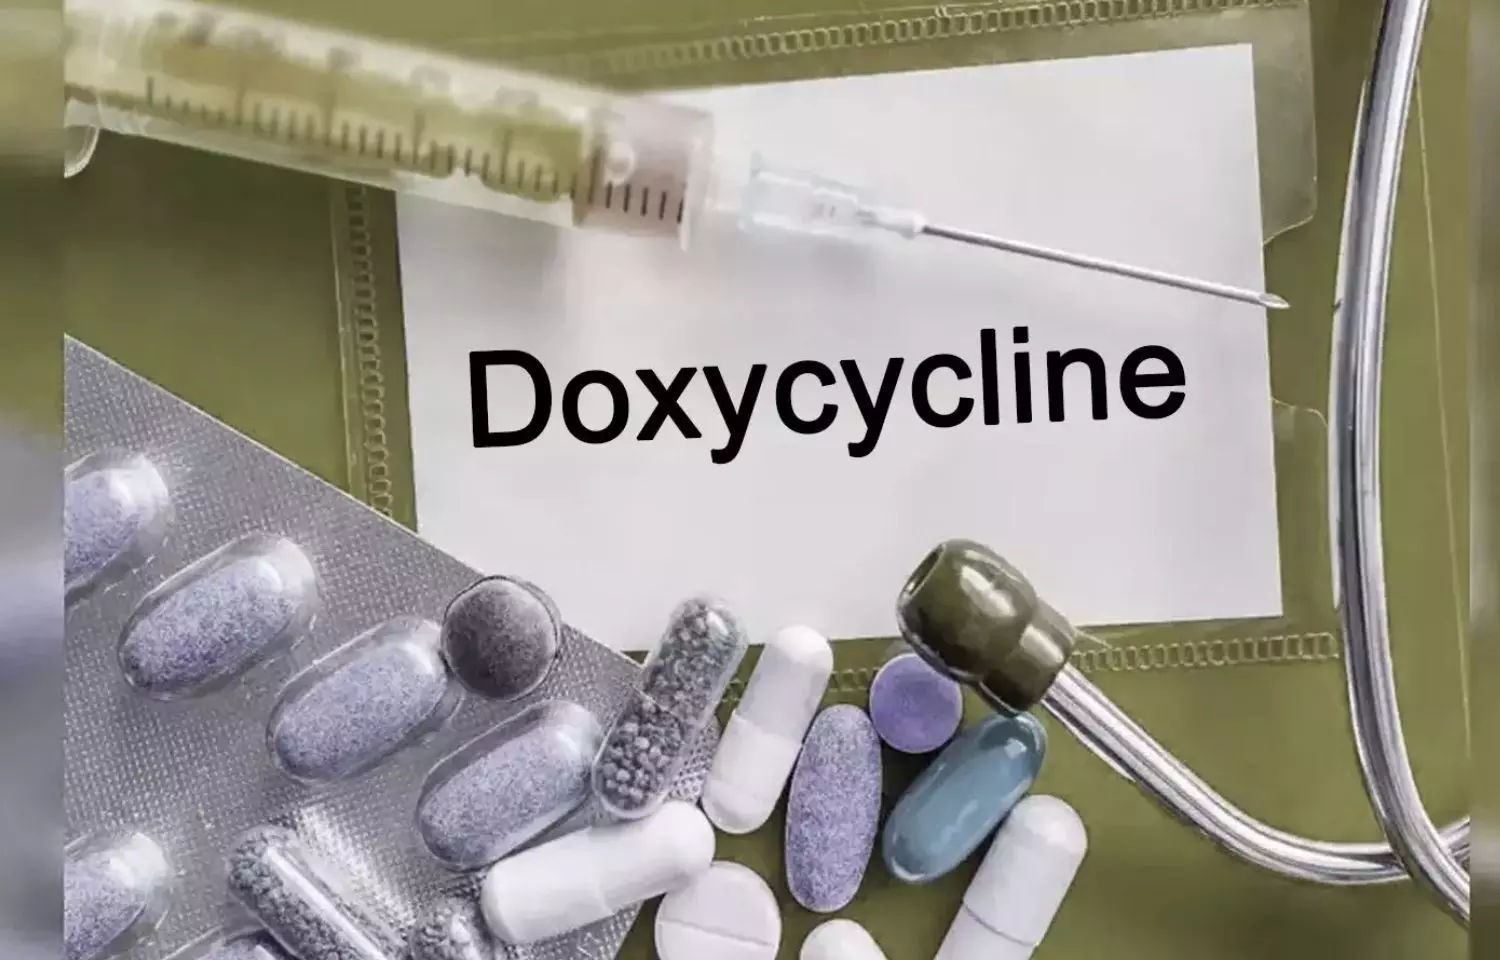 Doxycycline, a viable treatment option for mild-to-moderate community-acquired pneumonia: Study